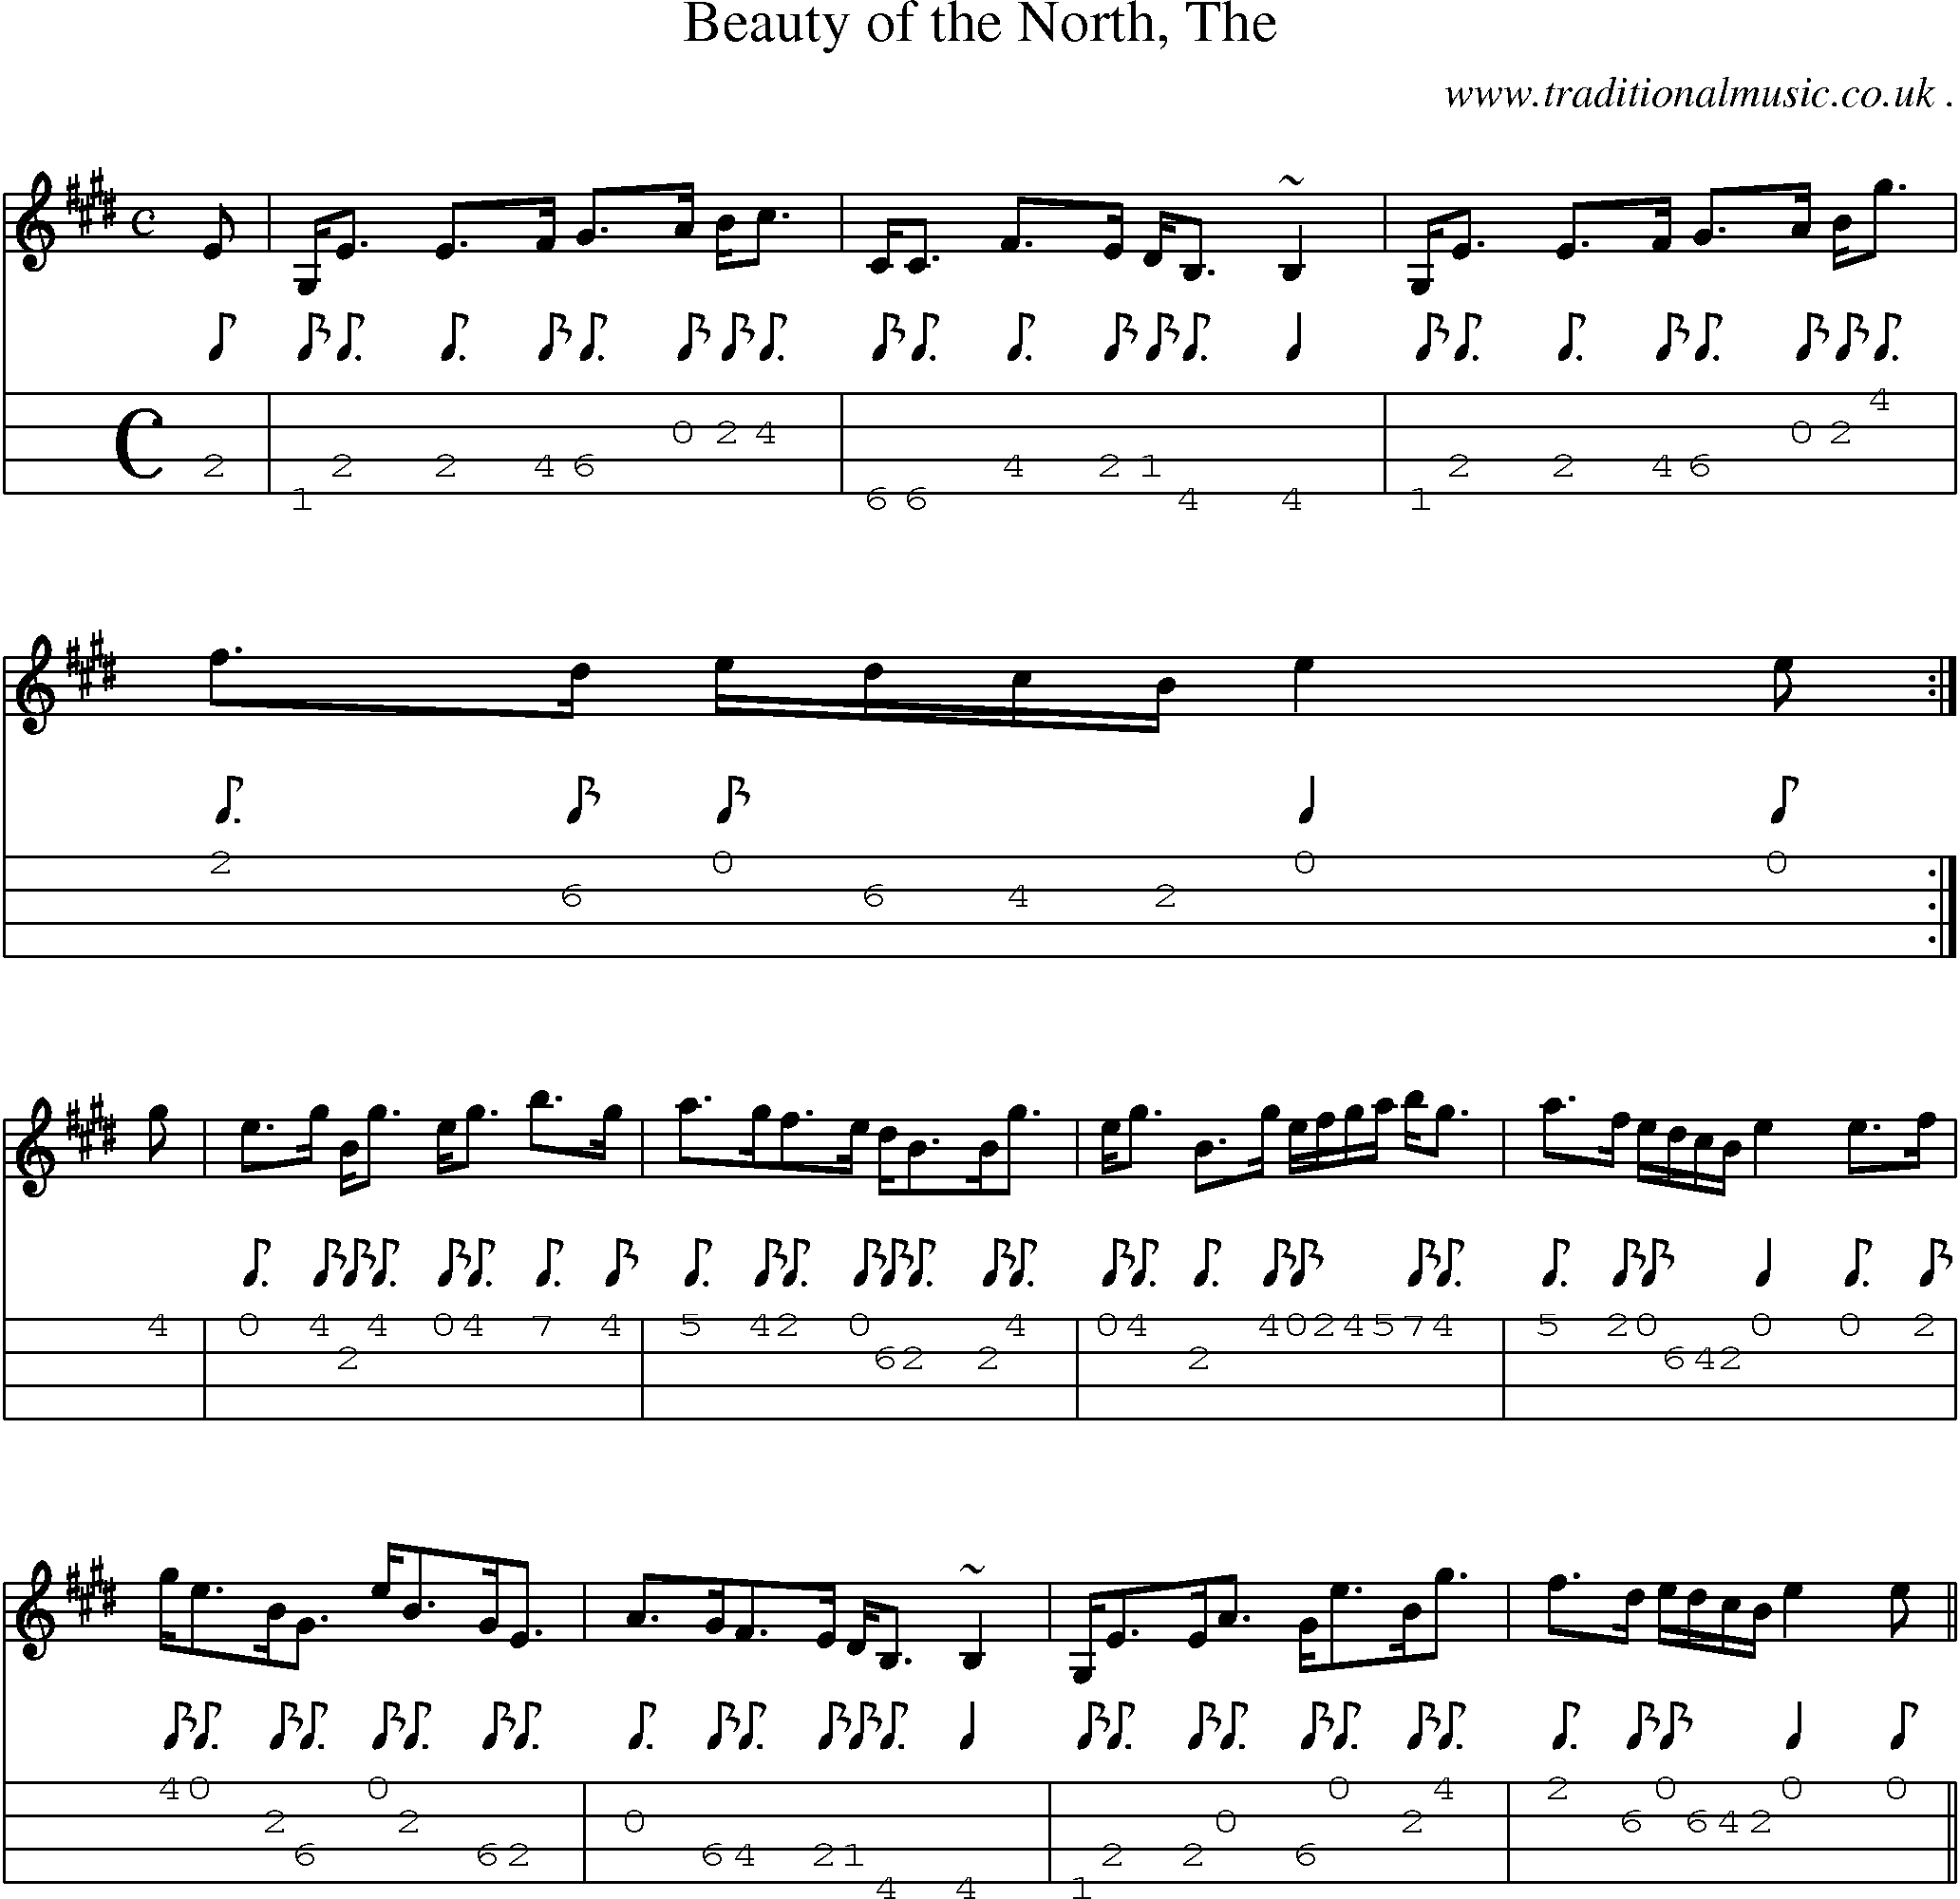 Sheet-music  score, Chords and Mandolin Tabs for Beauty Of The North The